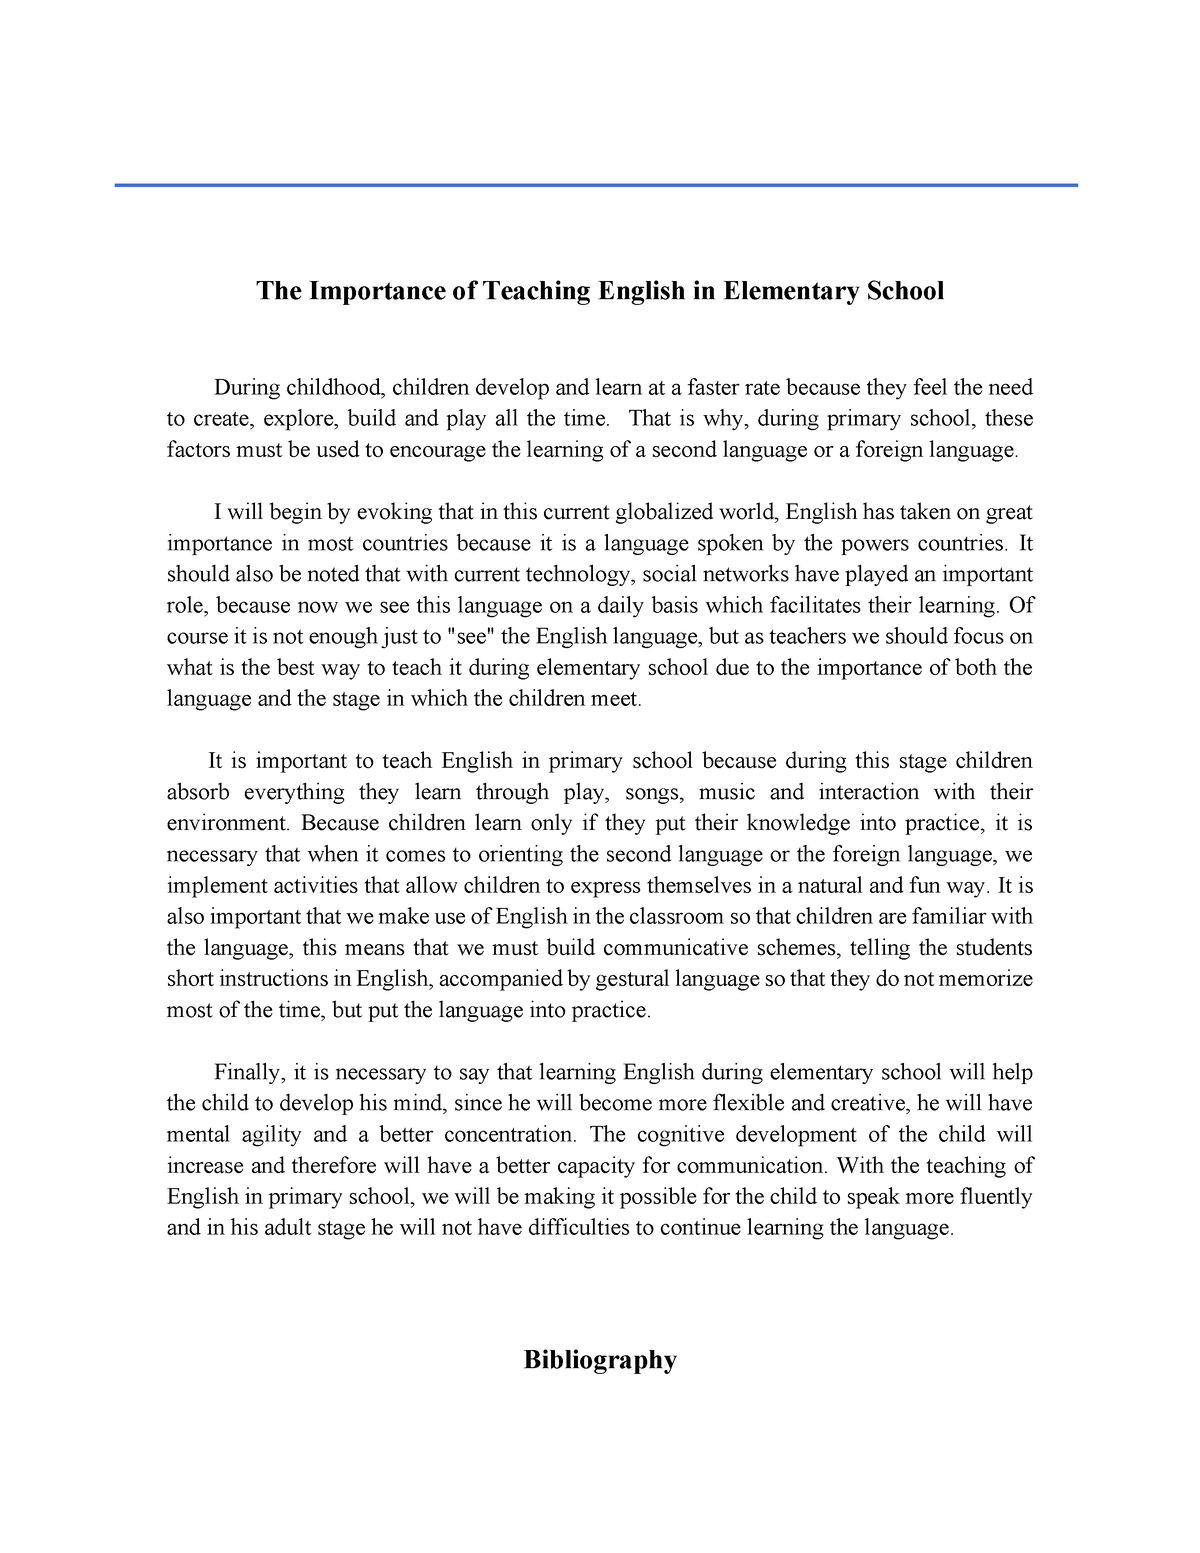 essay on what is teaching